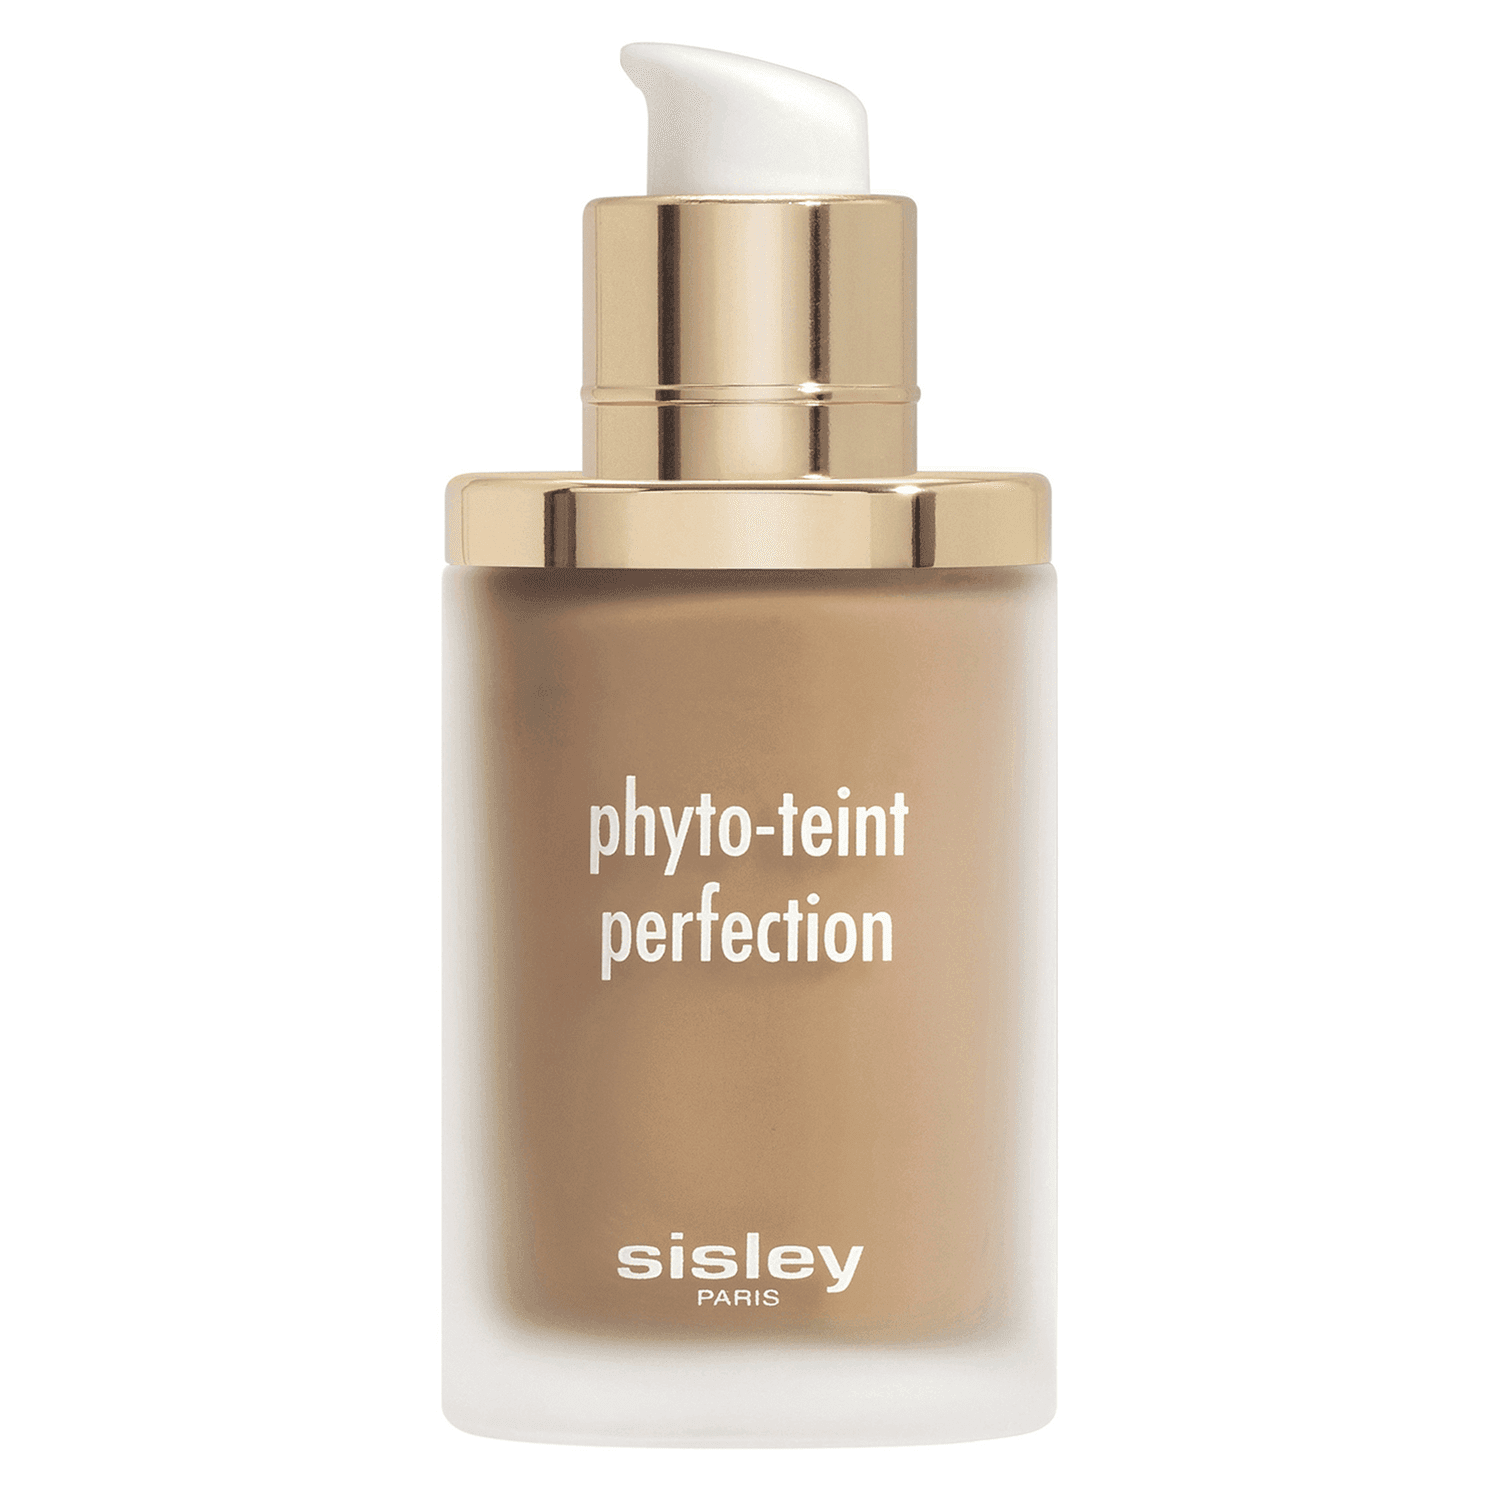 Phyto-Teint Perfection - Phyto-Teint Perfection 5W Toffee